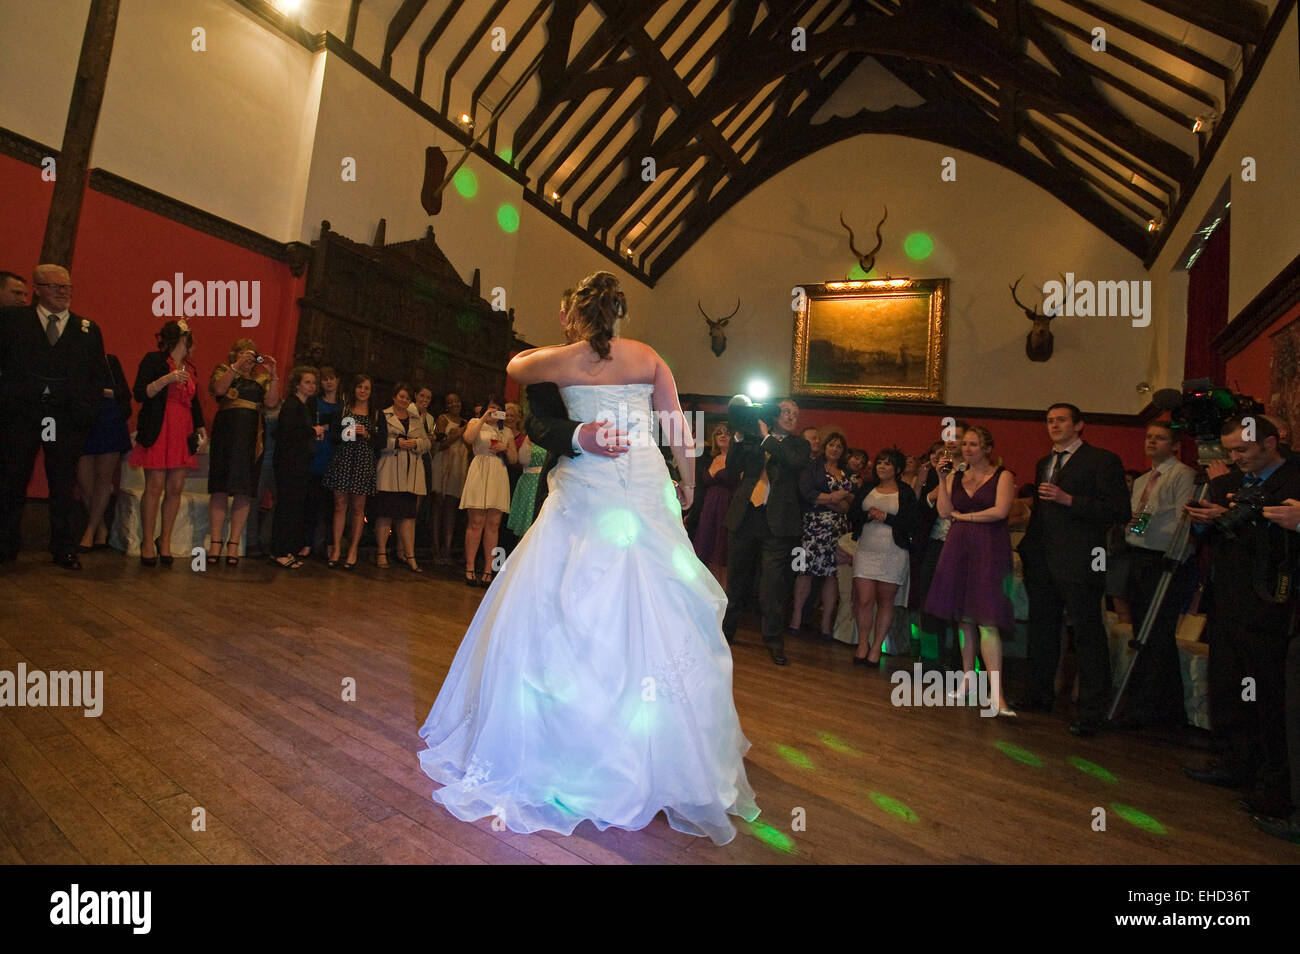 Horizontal portrait of a newly married couple having a traditional first dance together. Stock Photo